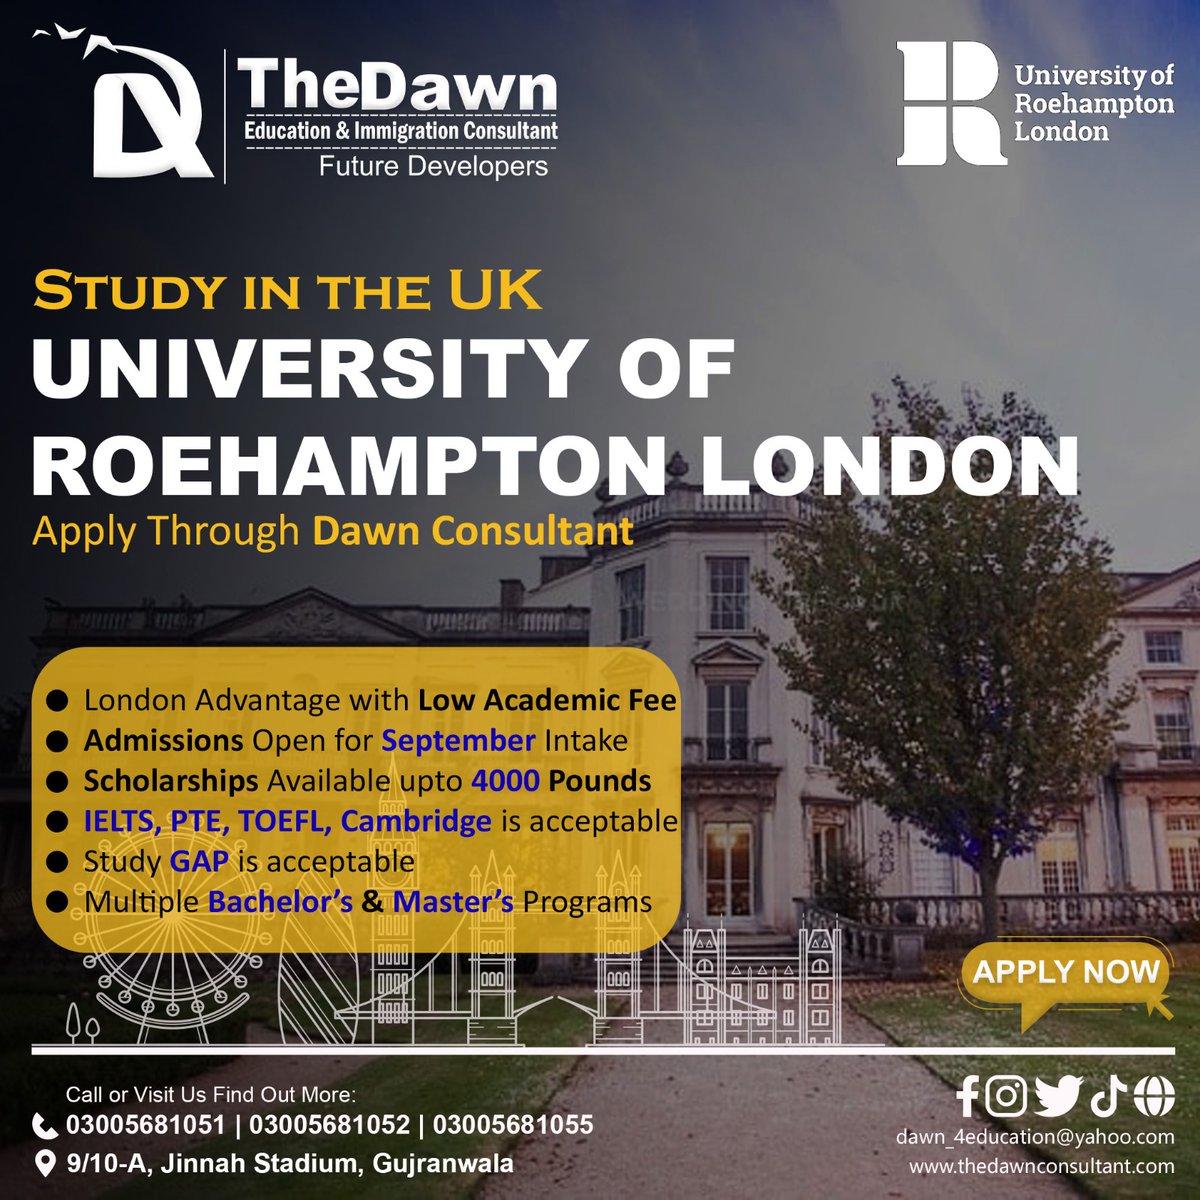 Hurry up to enroll now...!

#dawnconsultants #studyinuk